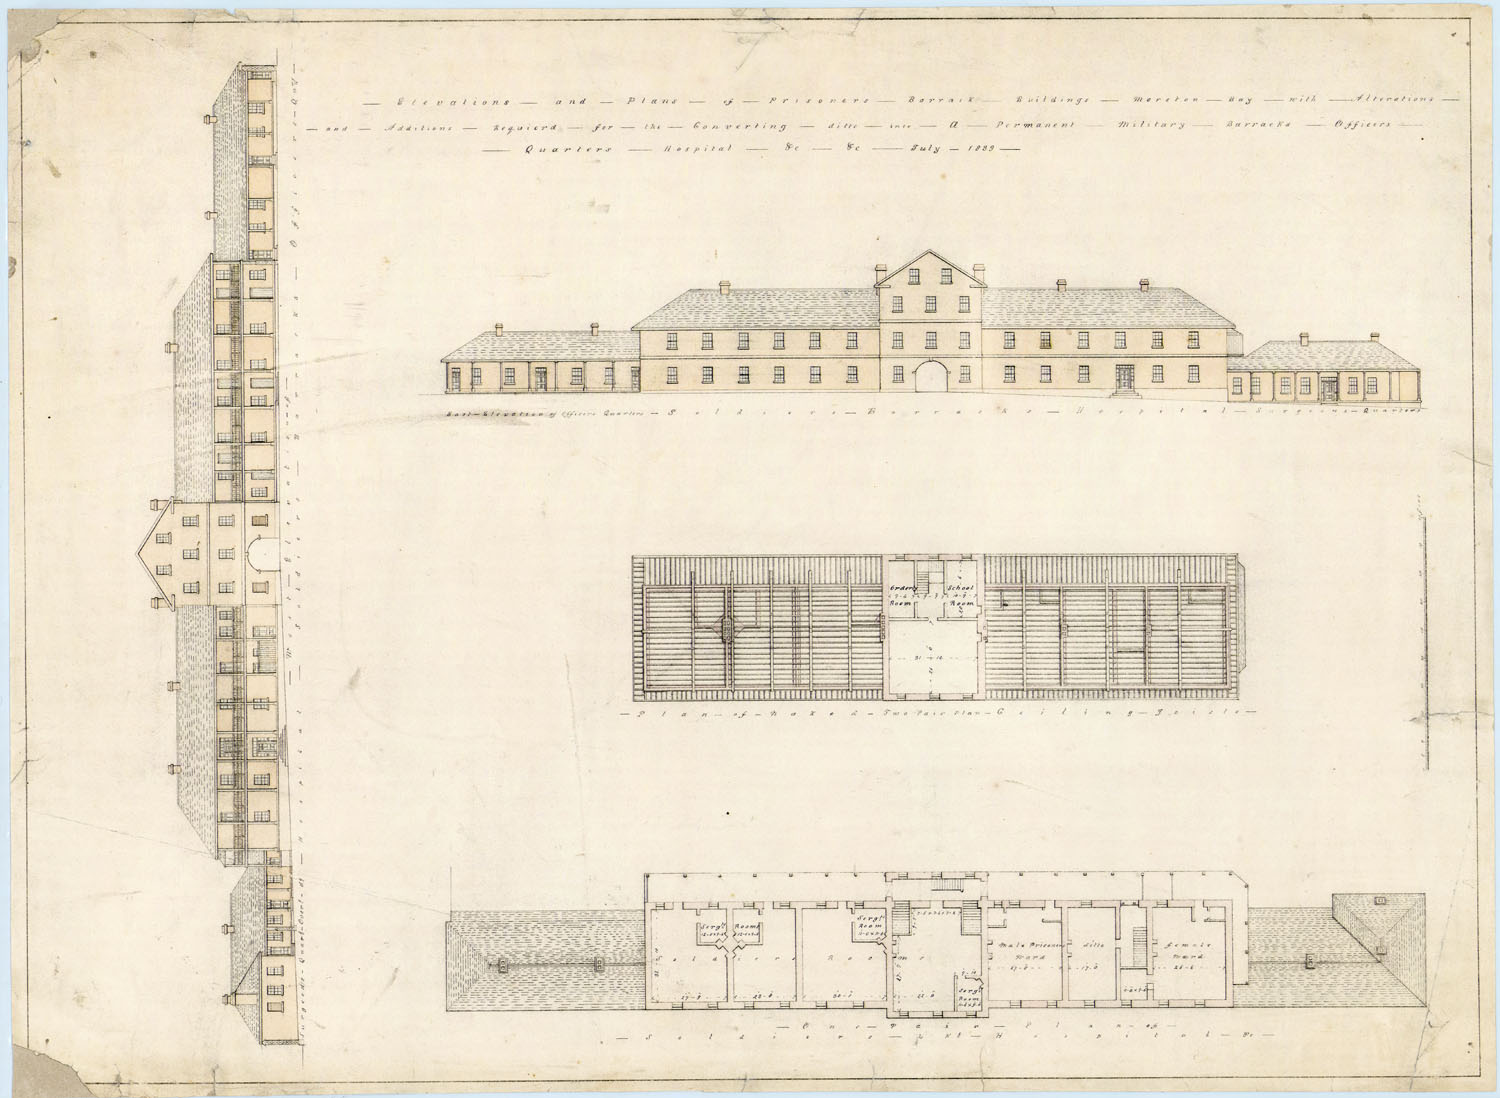 Elevations and plans of Prisoners' Barrack buildings, showing alterations and additions required for the converting the barracks into a permanent Military Barracks, Officers' quarters and hospital, etc, Moreton Bay.